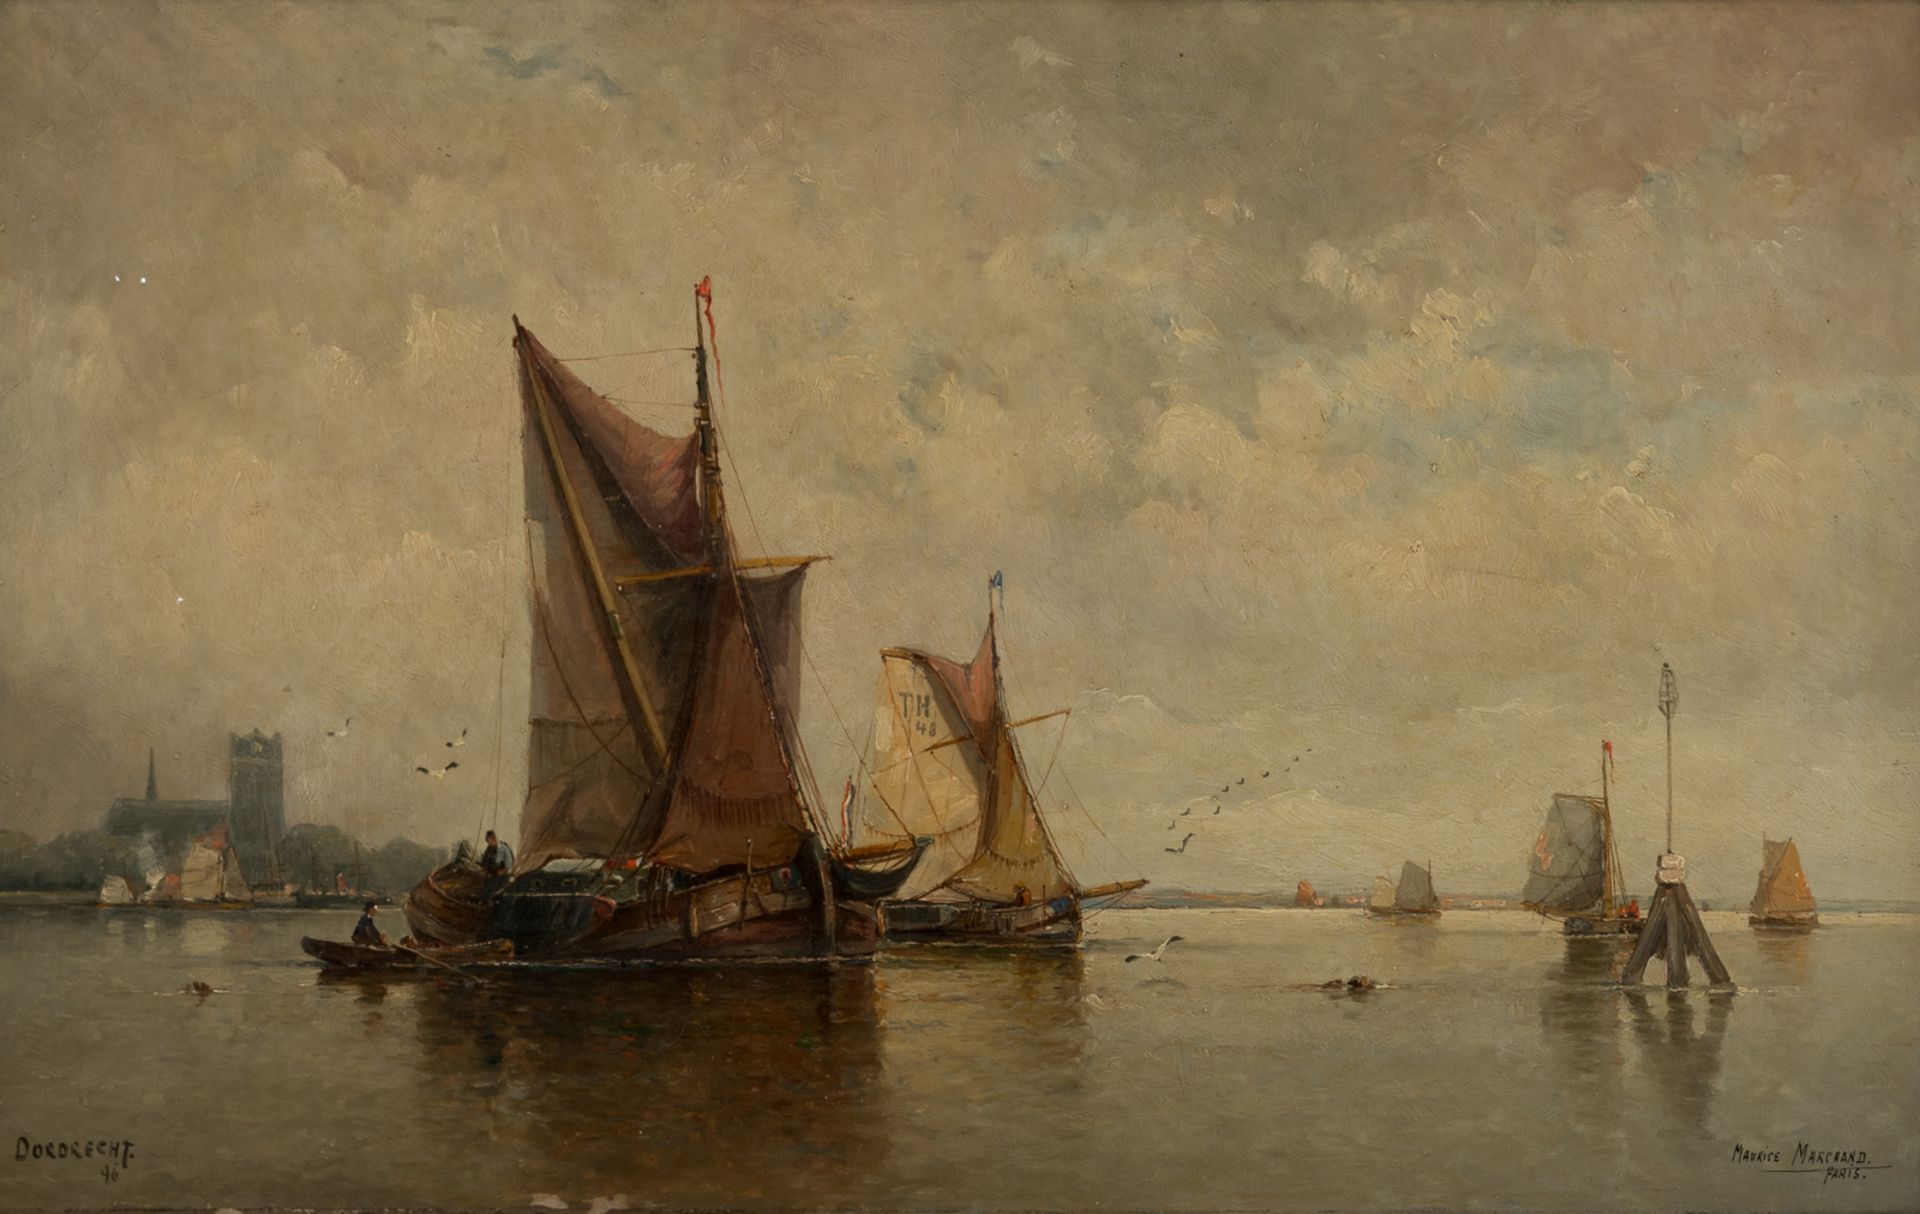 Marchand M., 'Dordrecht', oil on canvas, dated (18)96, 50 x 80 cm